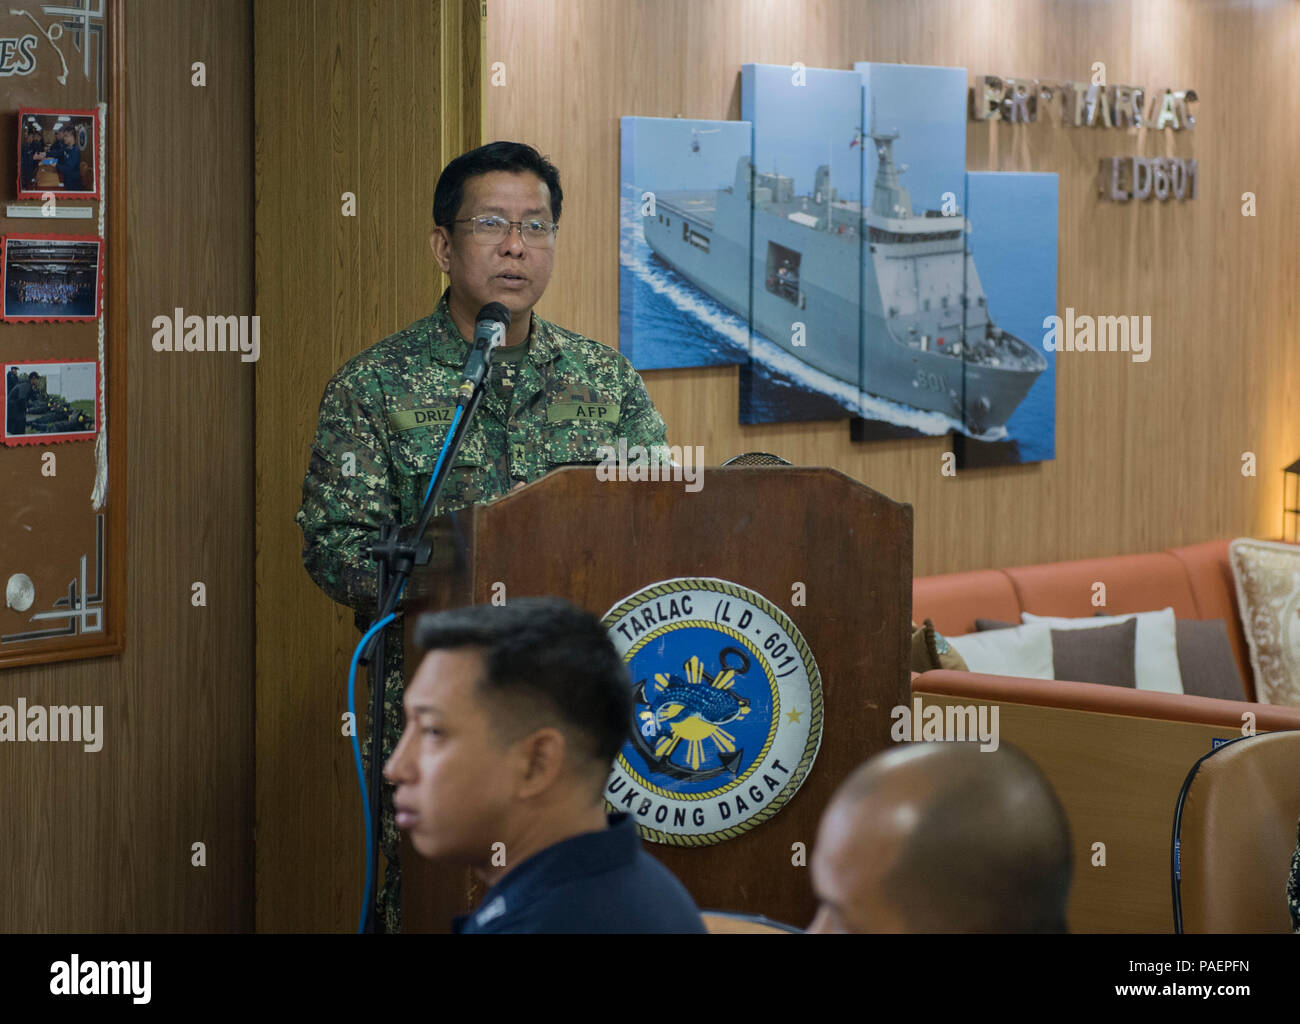 180714-N-OU129-131 SAN FERNANDO CITY, Philippines (July 14, 2018) Philippine Navy Commodore Nichols Driz, Commander, Naval Forces Northern Luzon, delivers remarks at the closing ceremony of Maritime Training Activity (MTA) Sama Sama 2018 aboard Philippine Navy ship BRP Tarlac (LD-601). The week-long engagement focuses on the full spectrum of naval capabilities and is designed to strengthen the close partnership between both navies while cooperatively ensuring maritime security, stability and prosperity. (U.S. Navy photo by Mass Communication Specialist 2nd Class Joshua Fulton/Released) Stock Photo